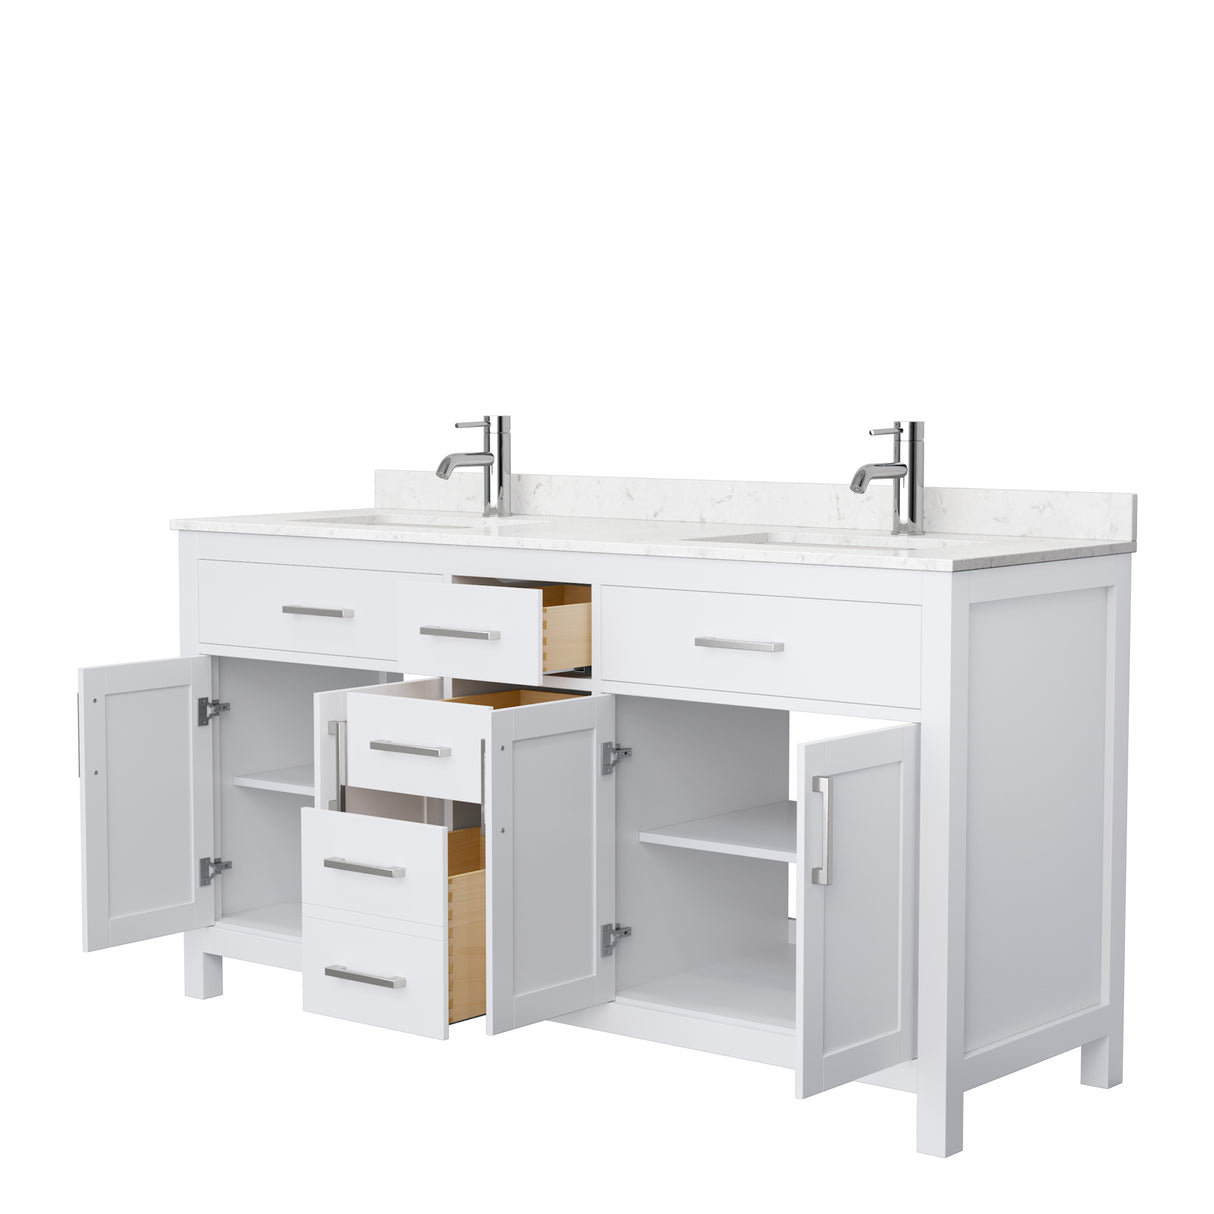 Beckett 66 Inch Double Bathroom Vanity in White Carrara Cultured Marble Countertop Undermount Square Sinks No Mirror